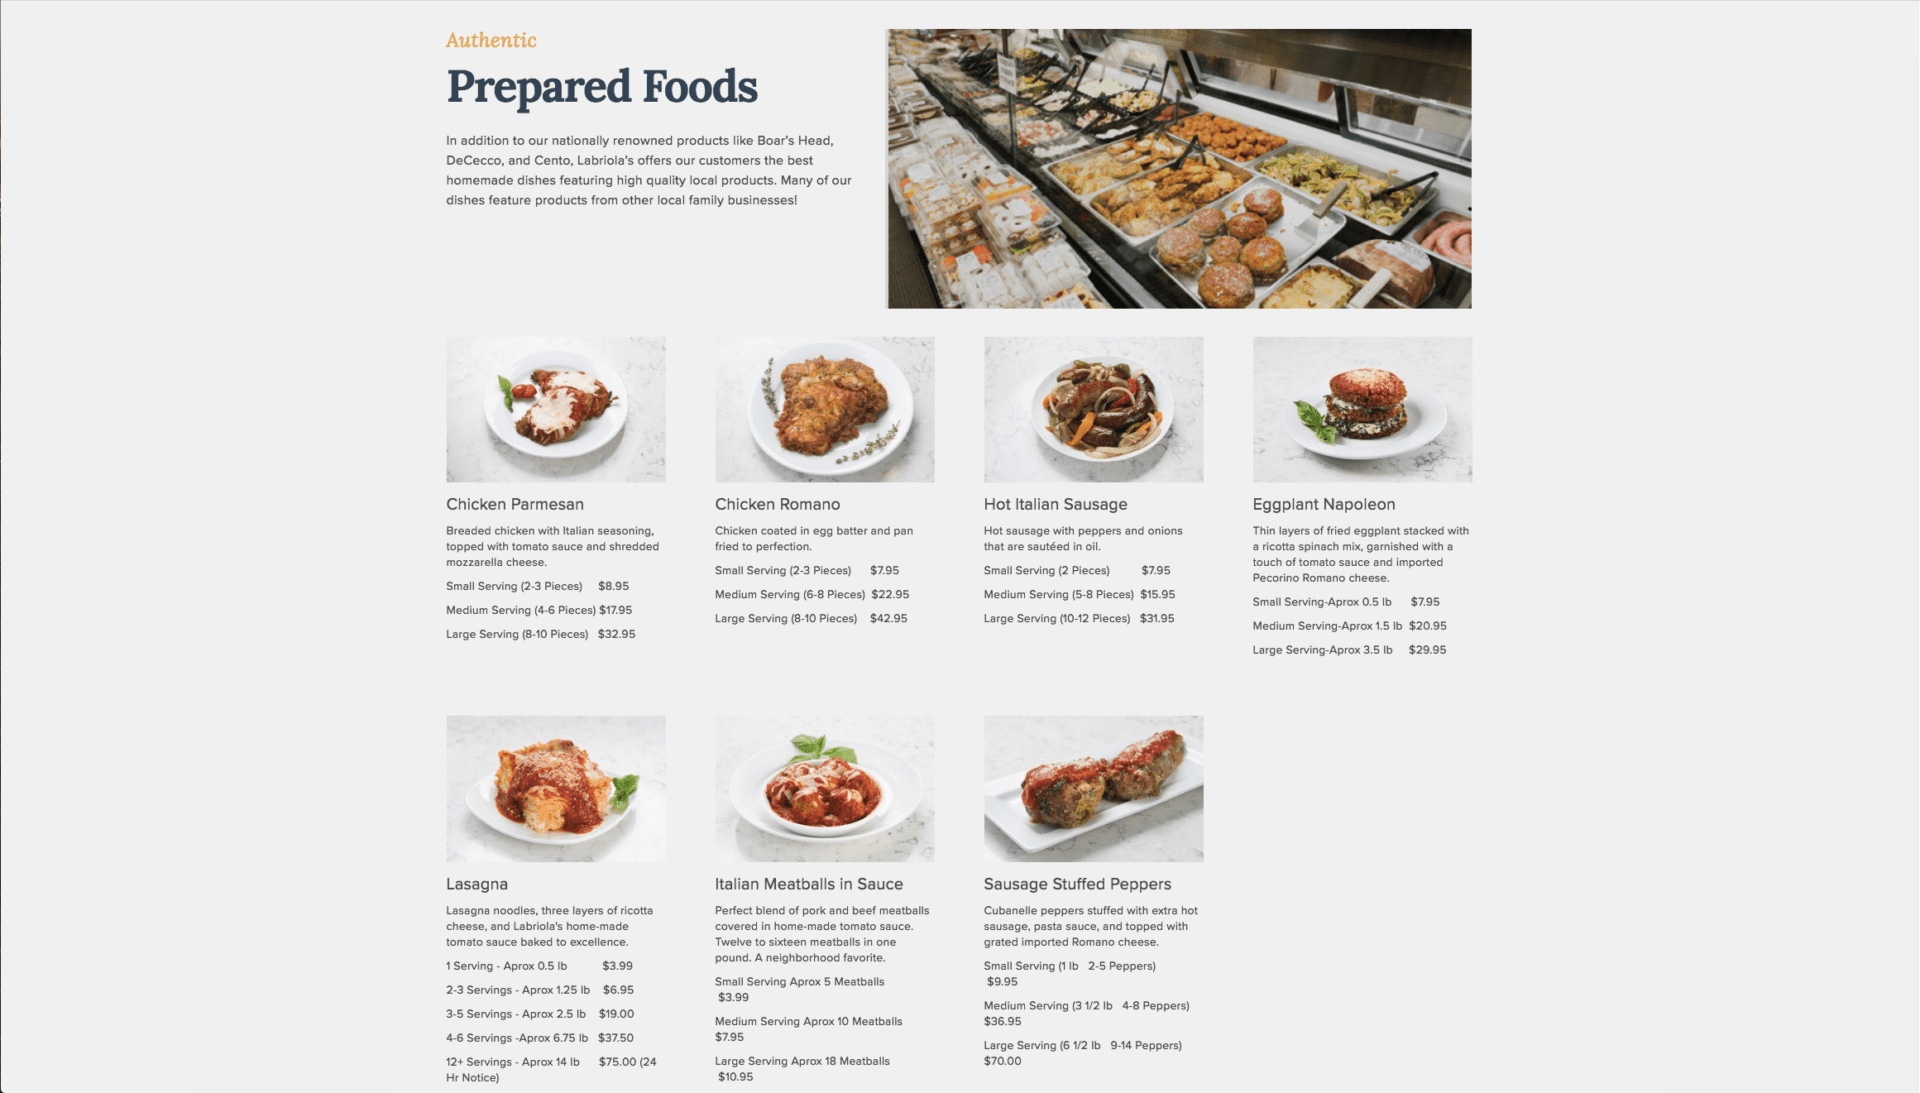 Screenshot of a web page featuring prepared foods in a market counter as well as individual photos of the different dishes available done for Commercial Photography Labriola's Market.